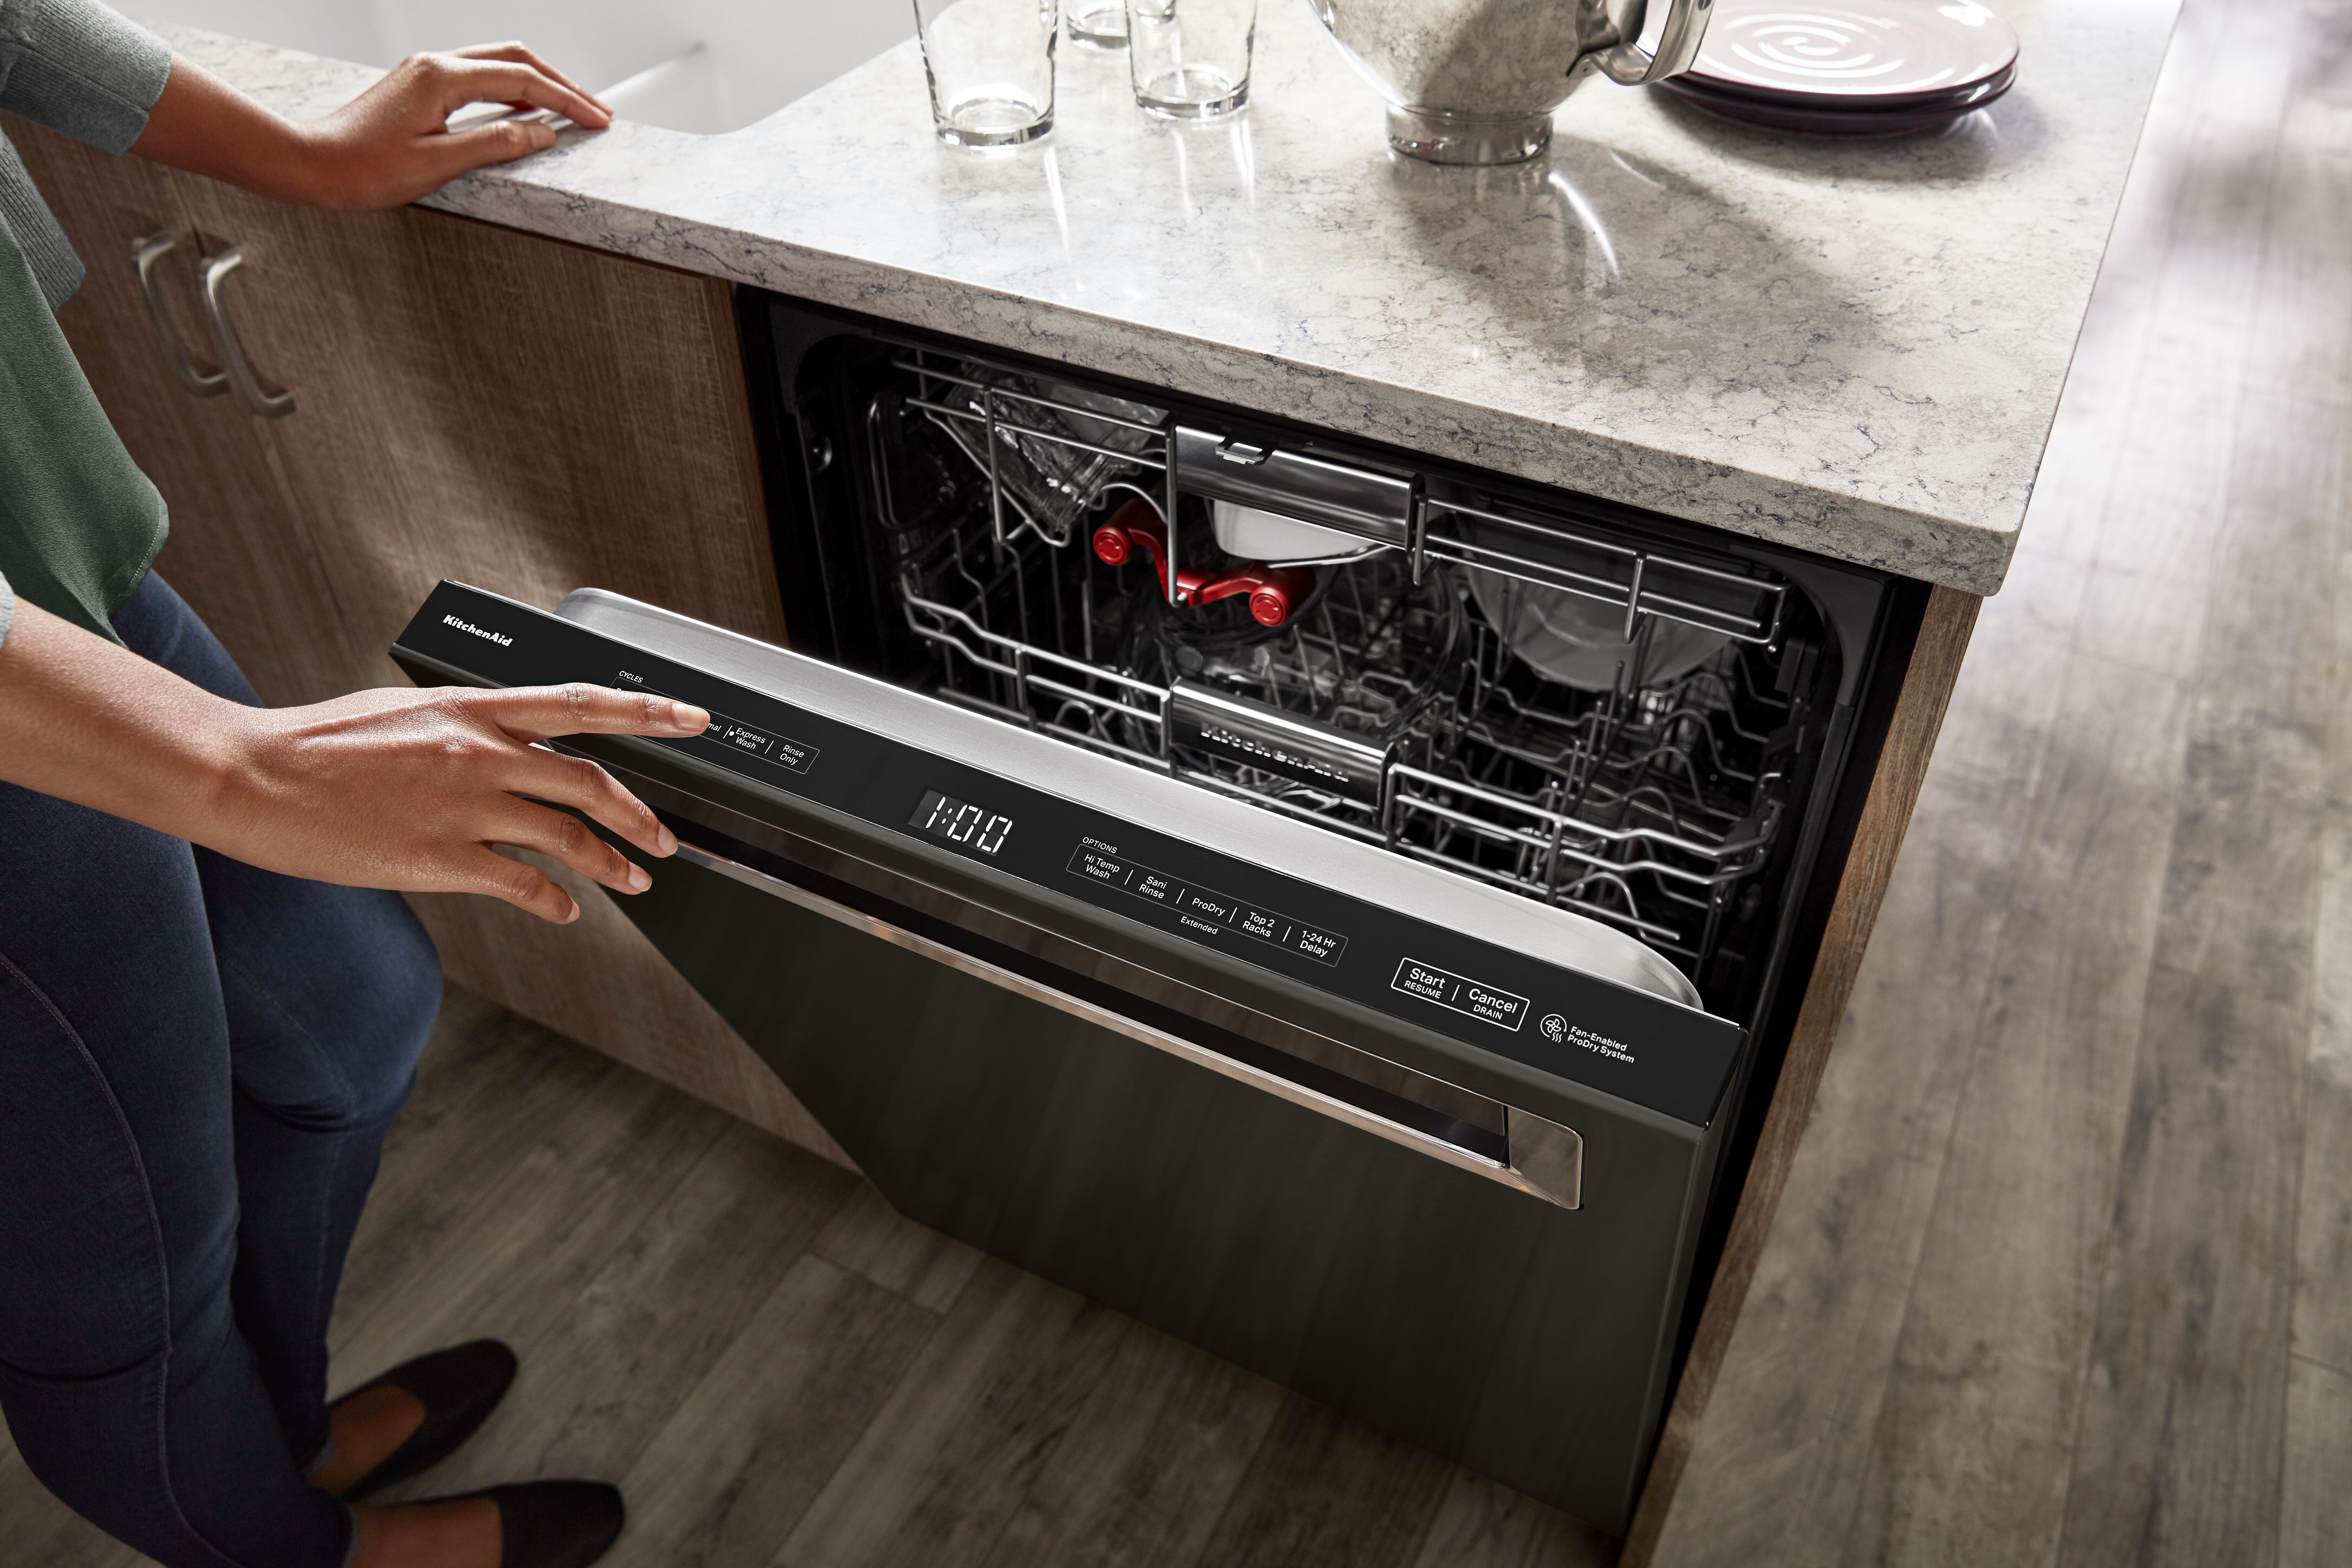 KitchenAid product image of KDPM604KBS built-in dishwasher with door propped open